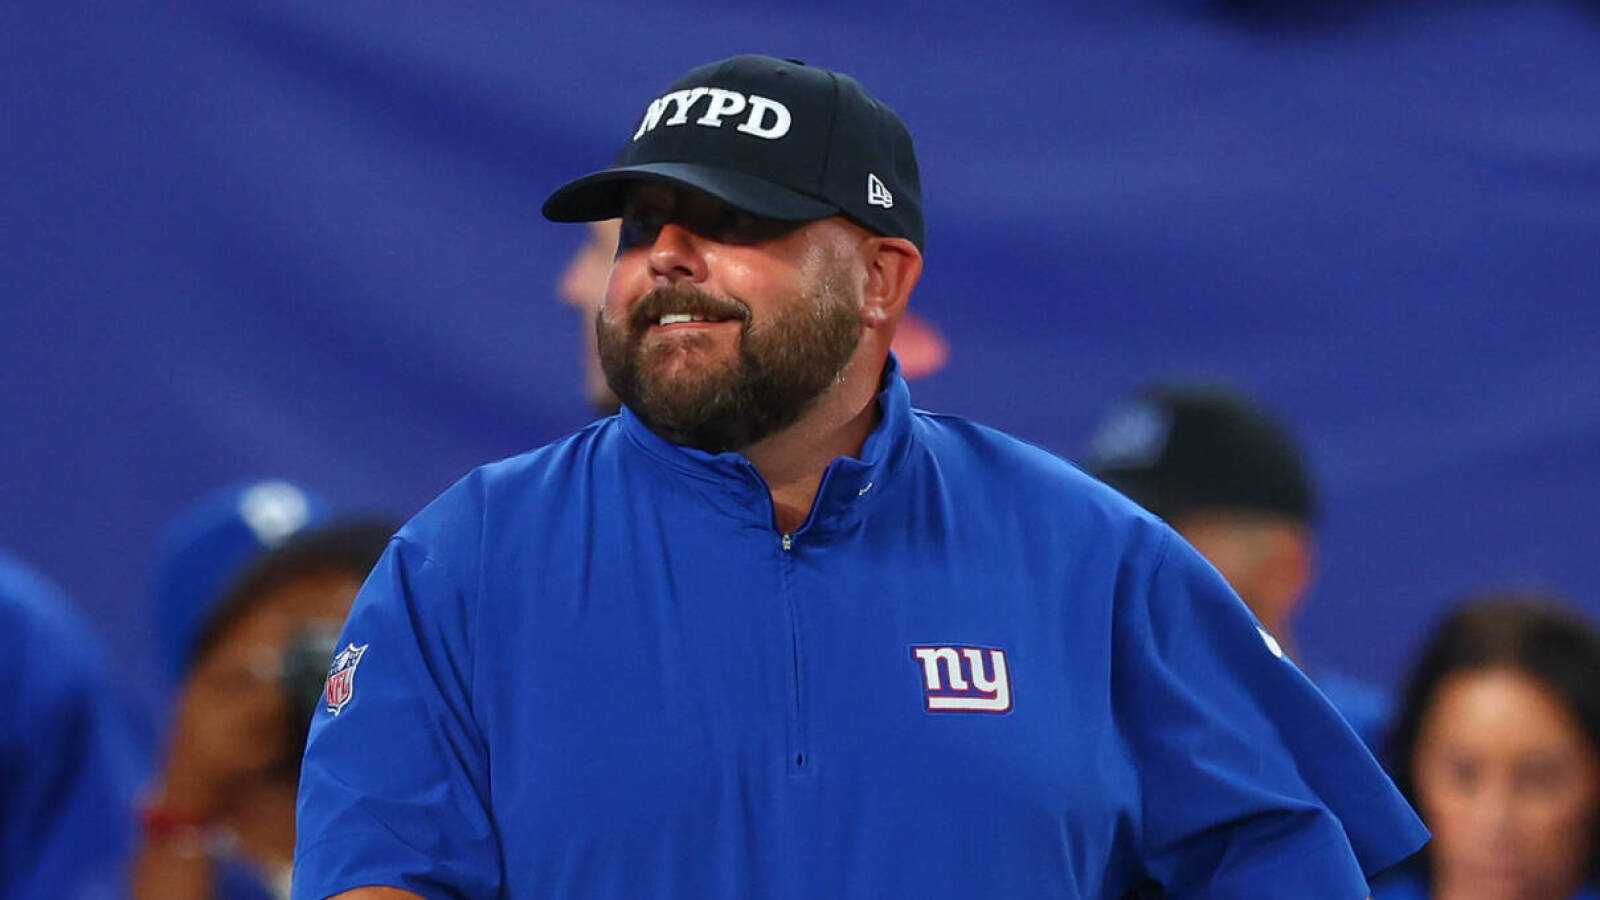 NFL News: New York Giants at a Crossroads - Is Daboll's Act Brilliant Motivation or Cause for Dismissal?